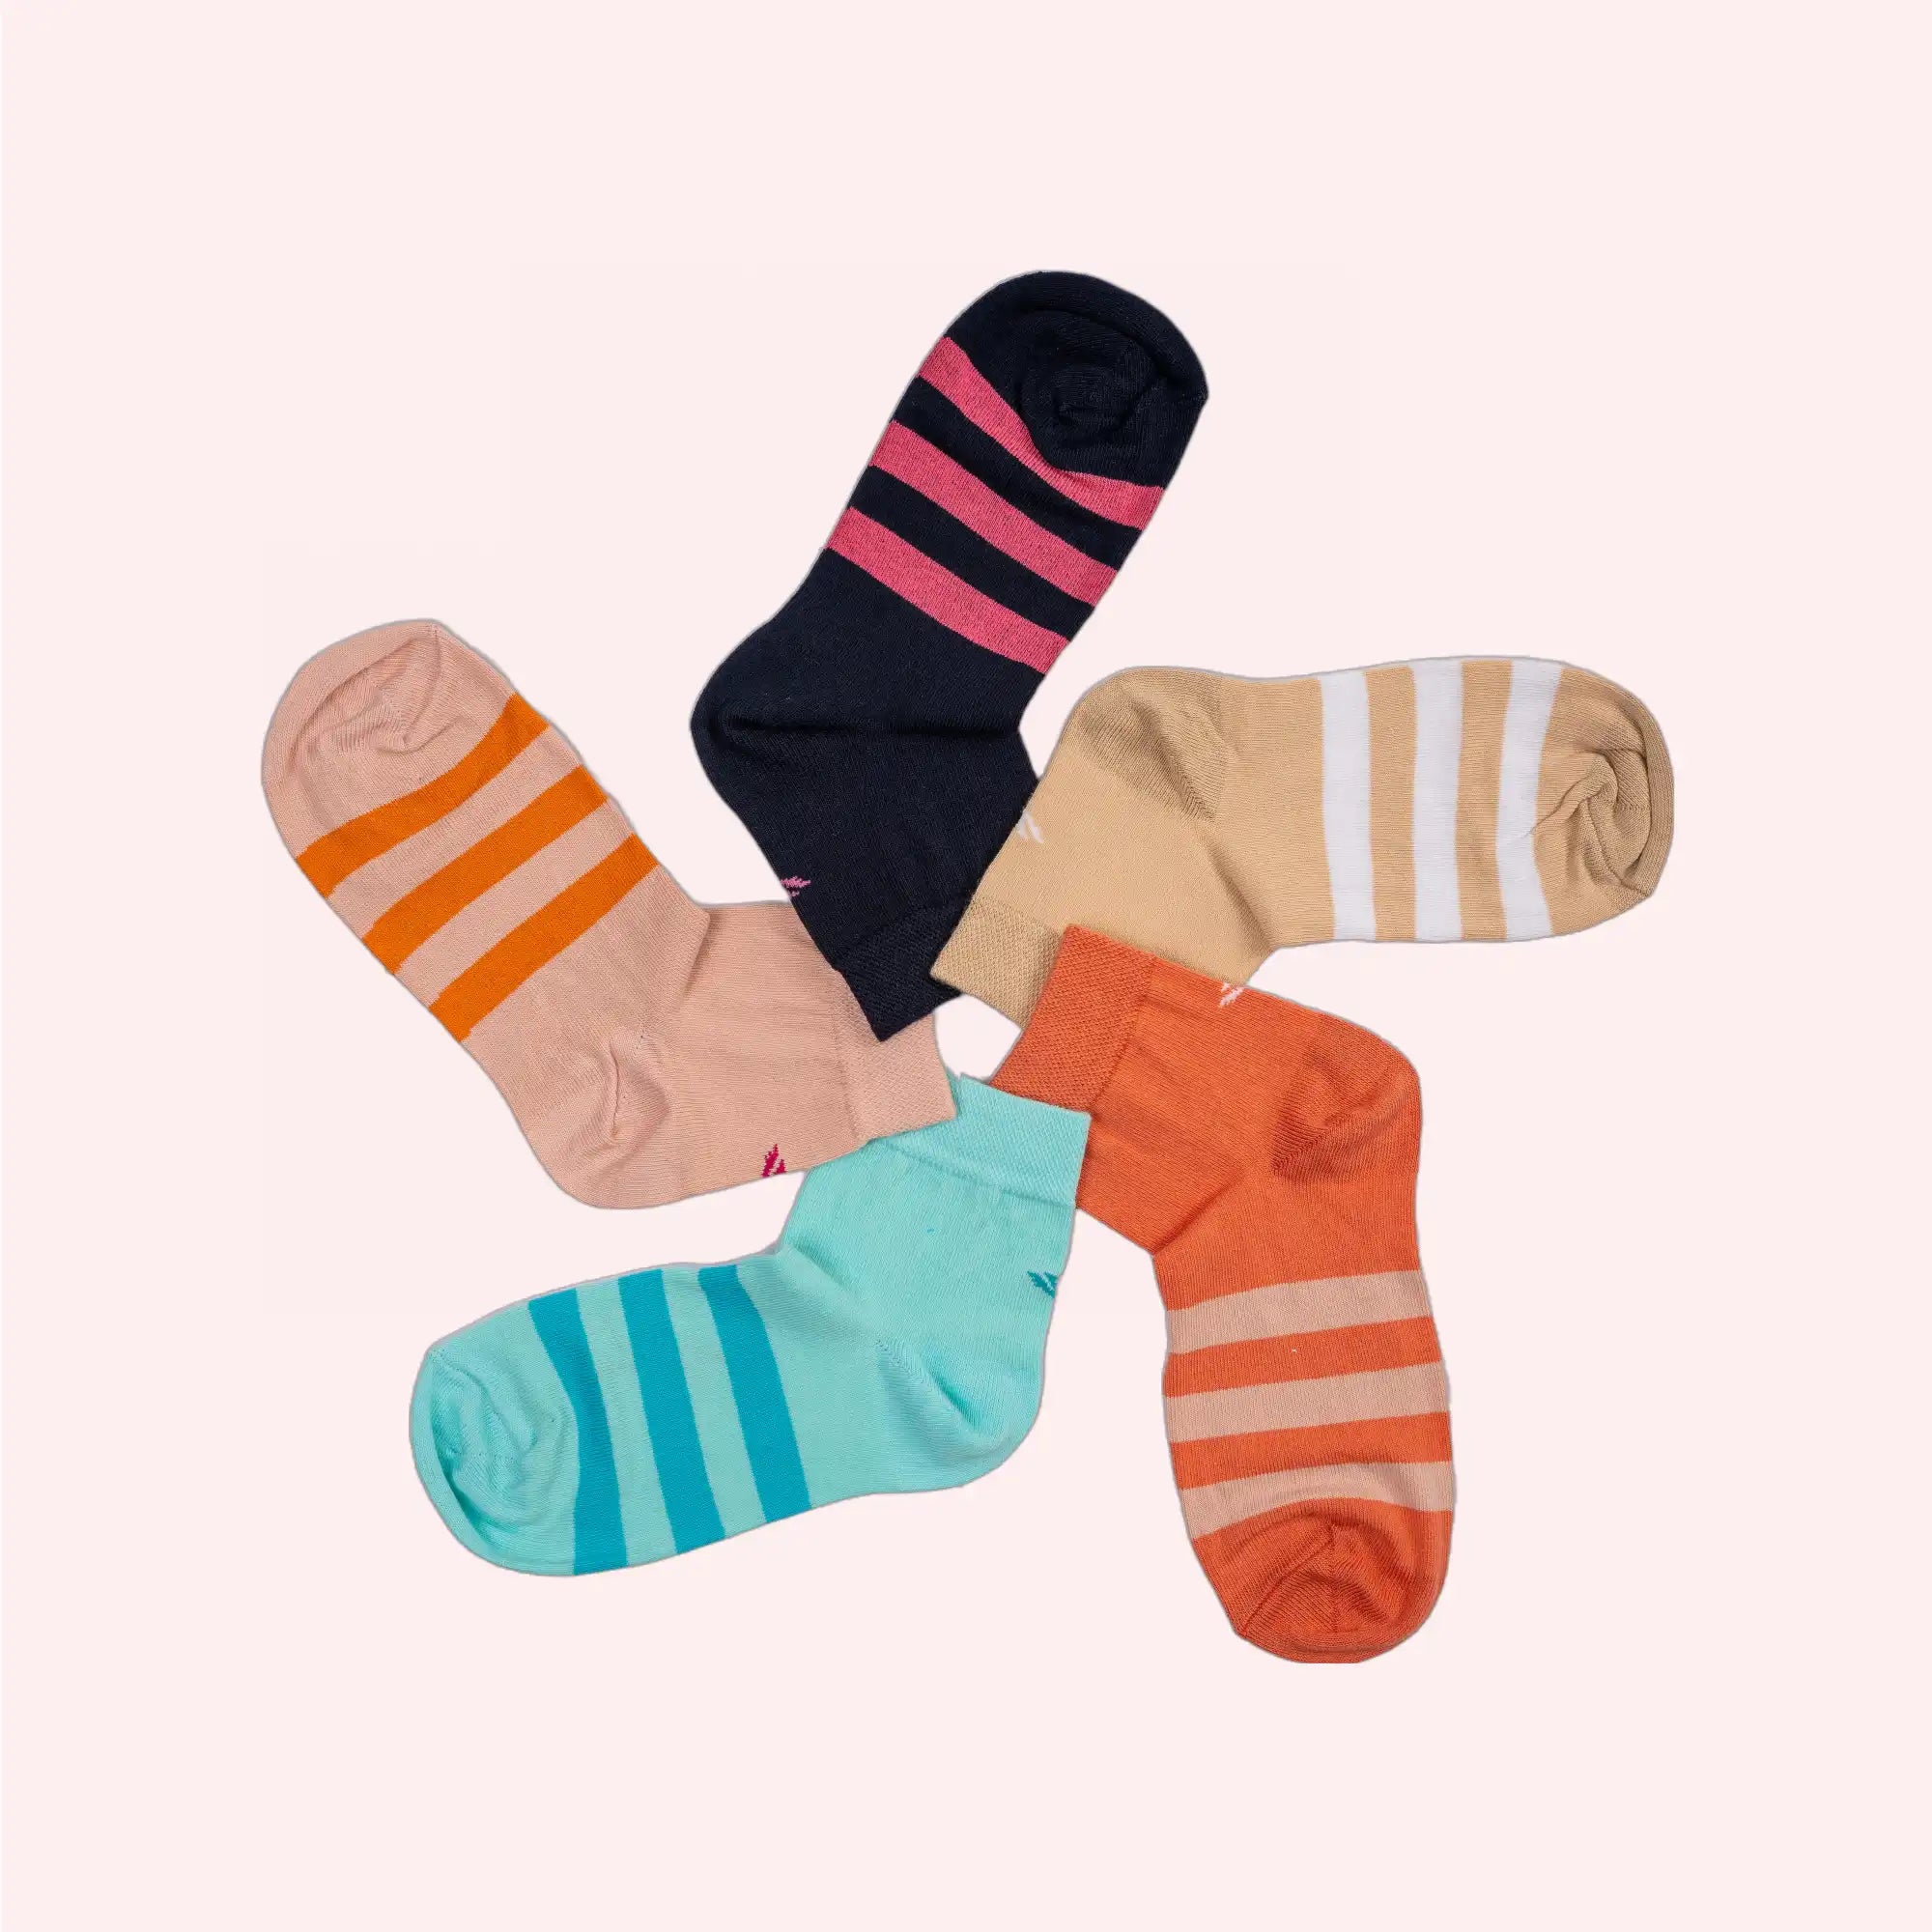 Young Wings Women's Multi Colour Cotton Fabric Design Ankle Length Socks - Pack of 5, Style no. W1-4002 N